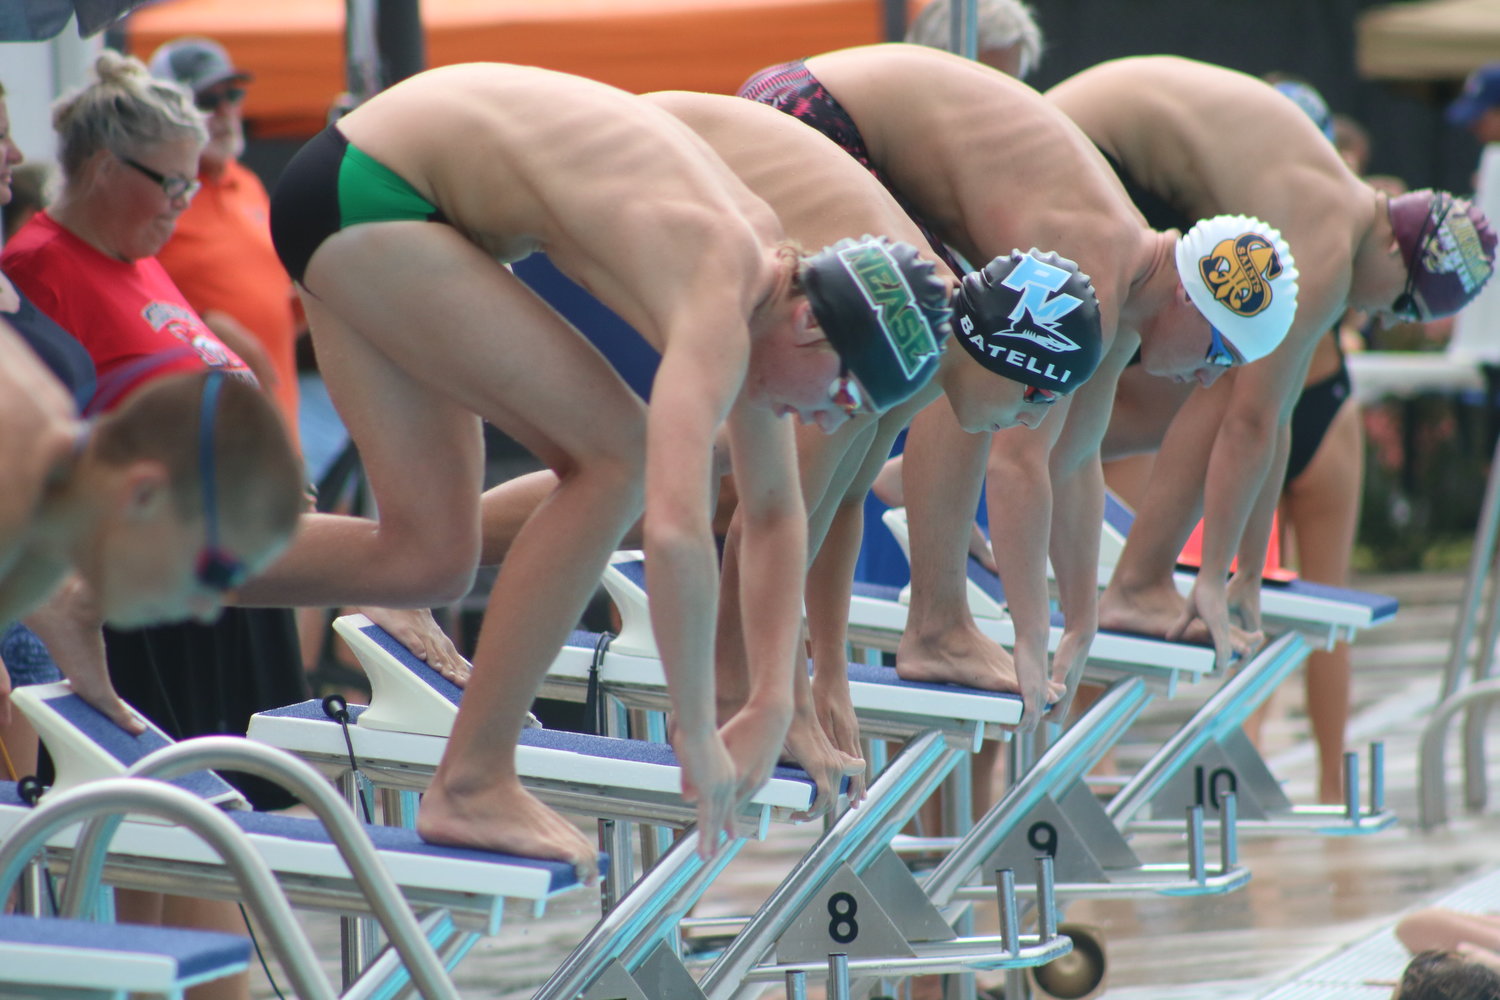 Fifteen area high school swim teams, including Nease and Ponte Vedra competed in the Second Annual Frank Holleman Invitational Sept. 17.